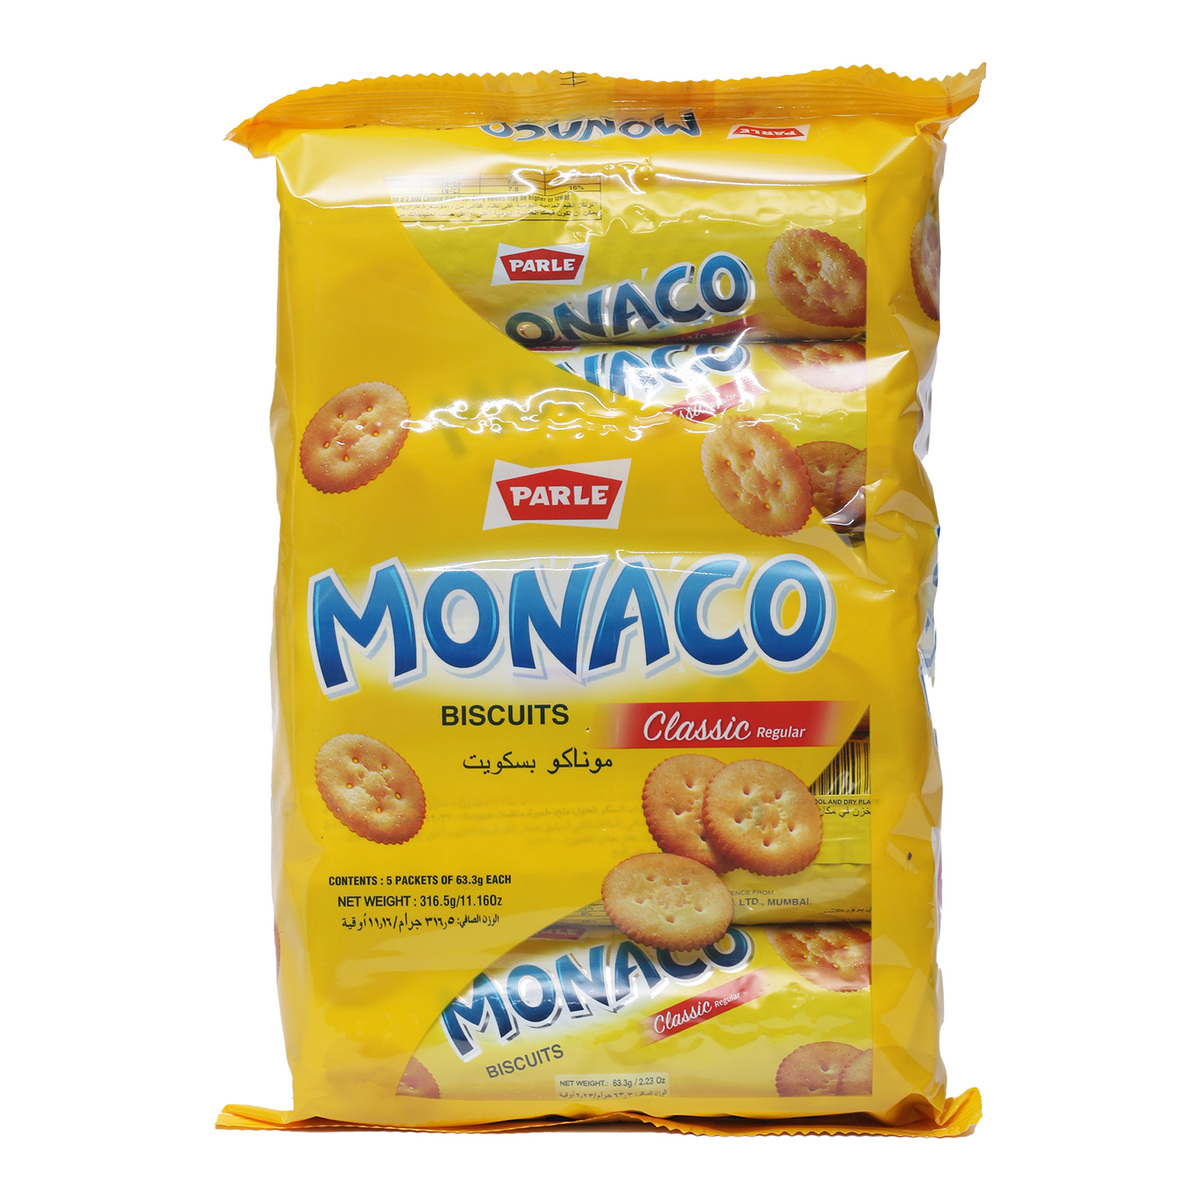 Parle Monaco Classic Biscuits 5 x 63.3 g